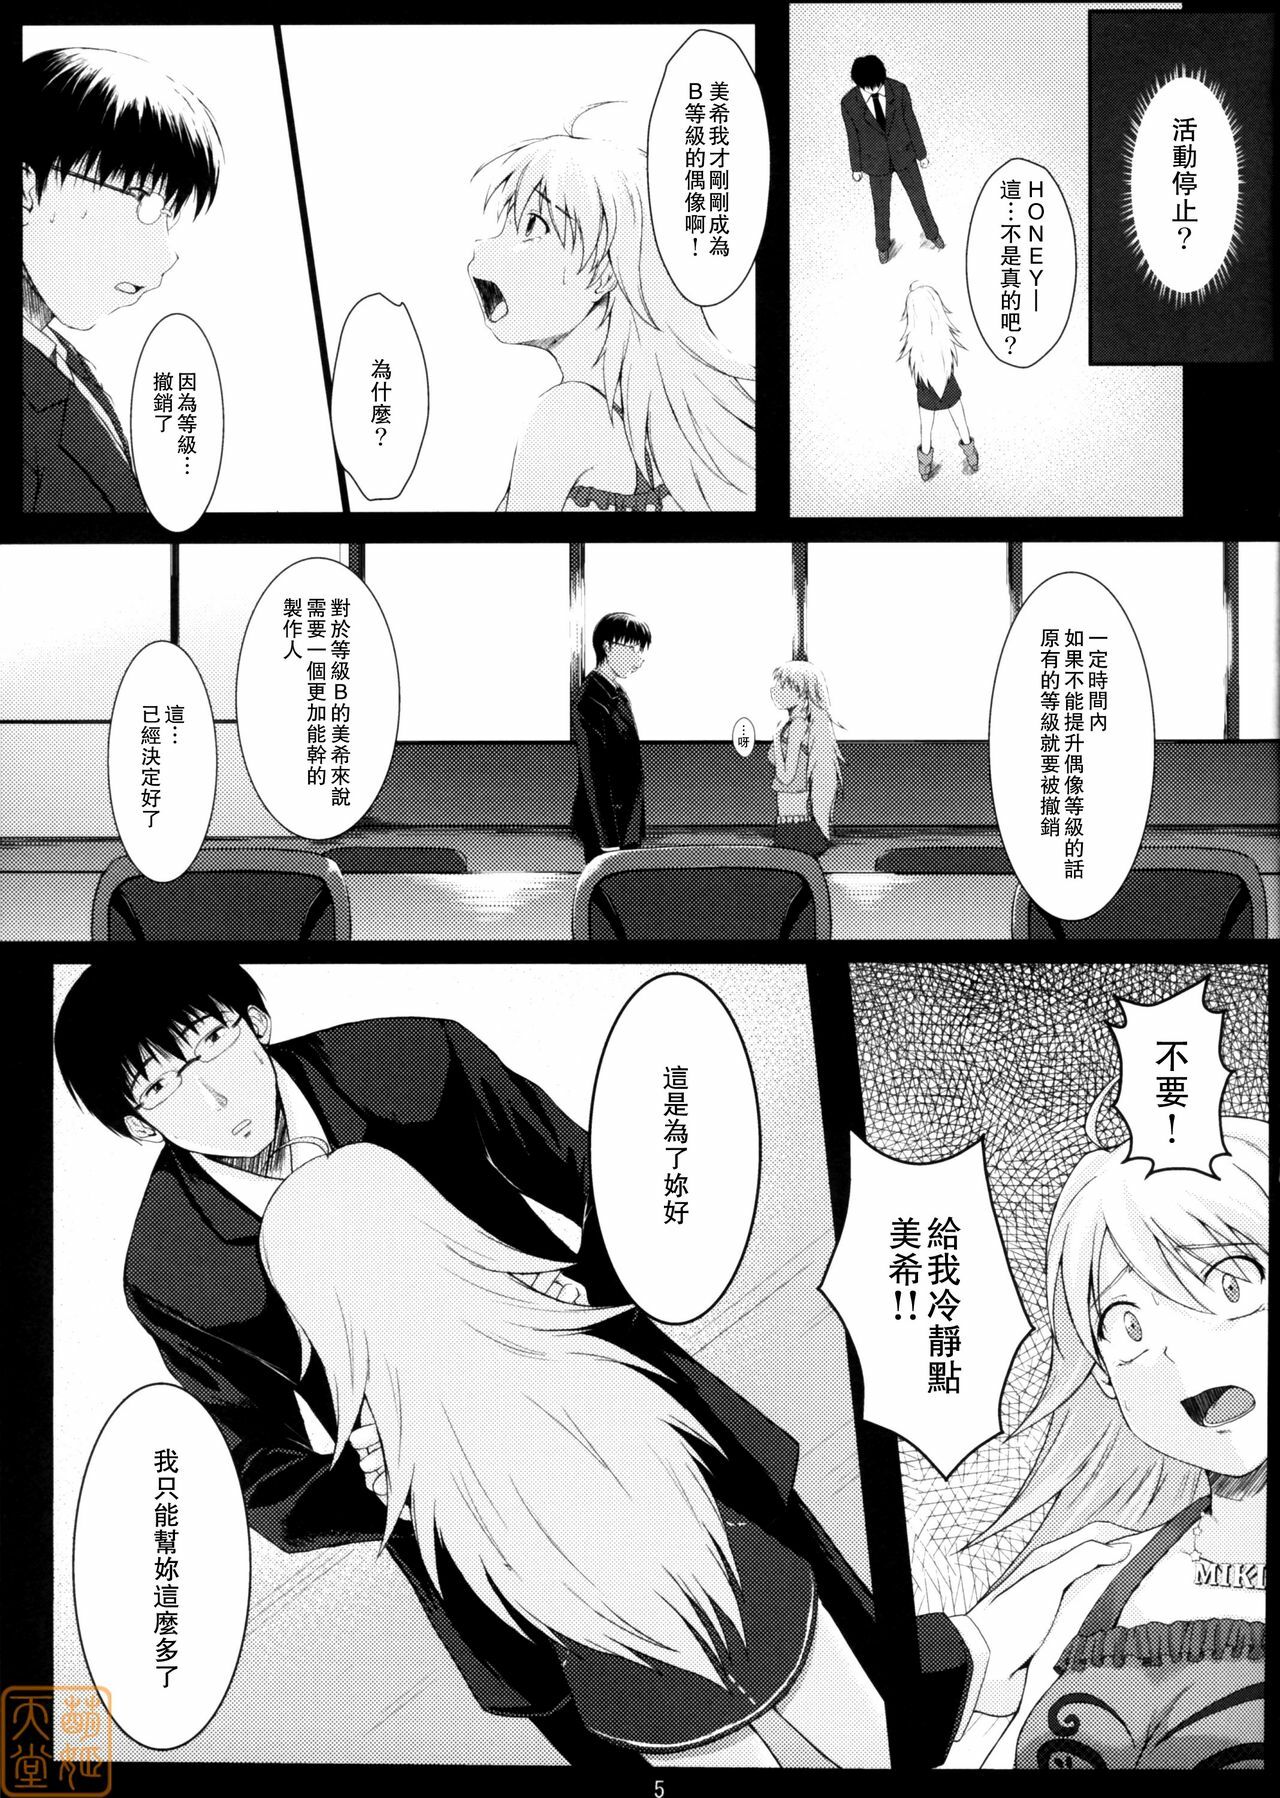 (C75) [Count2.4 (Nishi)] Love x 2 Shining Star (THE iDOLM@STER) [Chinese] [萌姬天堂] page 4 full